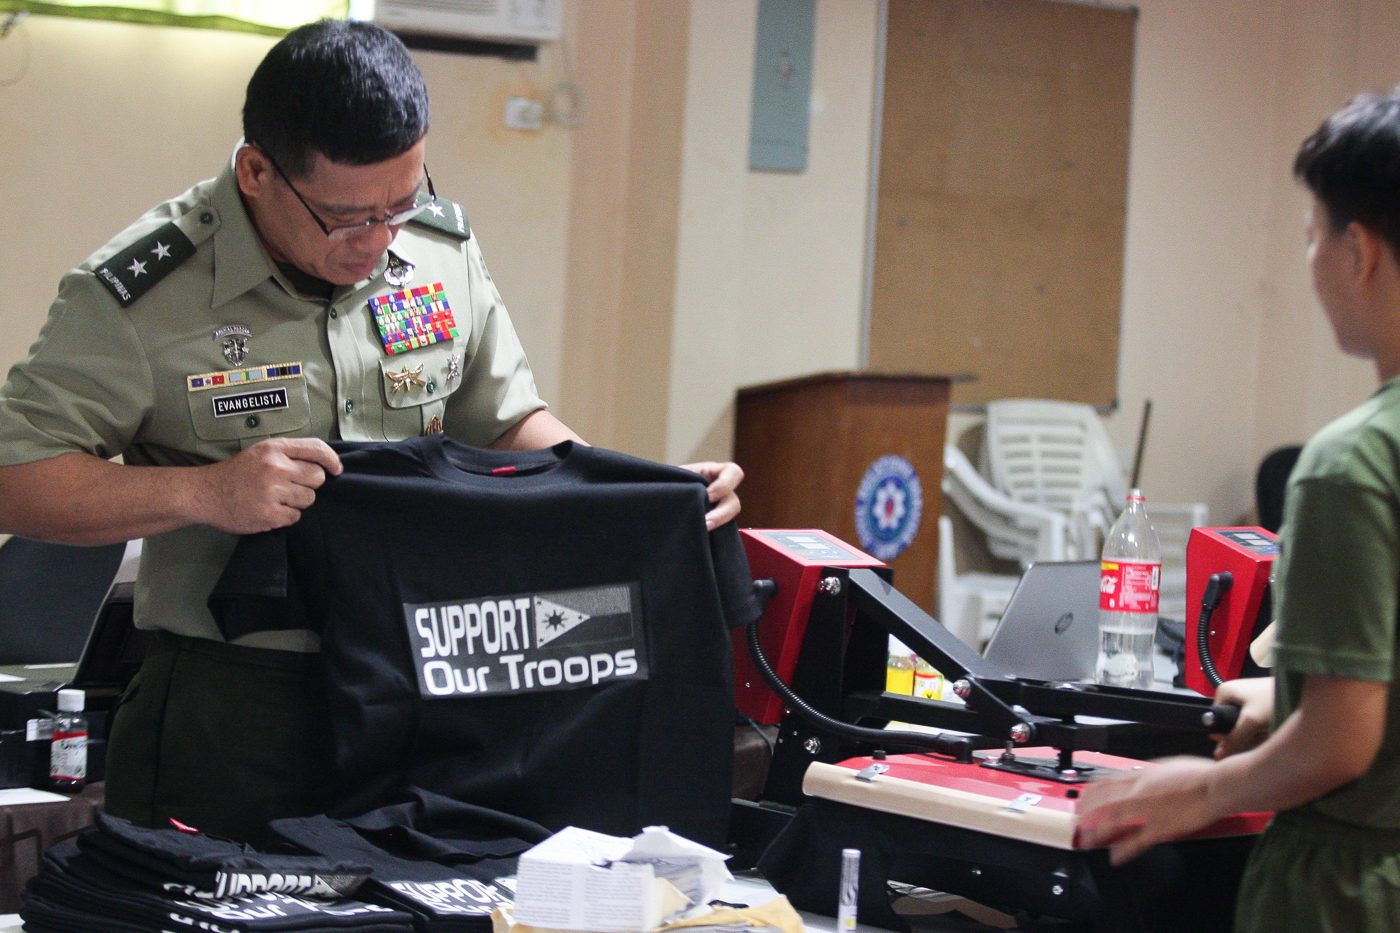 FOR THE TROOPS. Brigadier General Ronnie Evangelista holds up one of the shirts. Photo by Jasmin Dulay/Rappler 